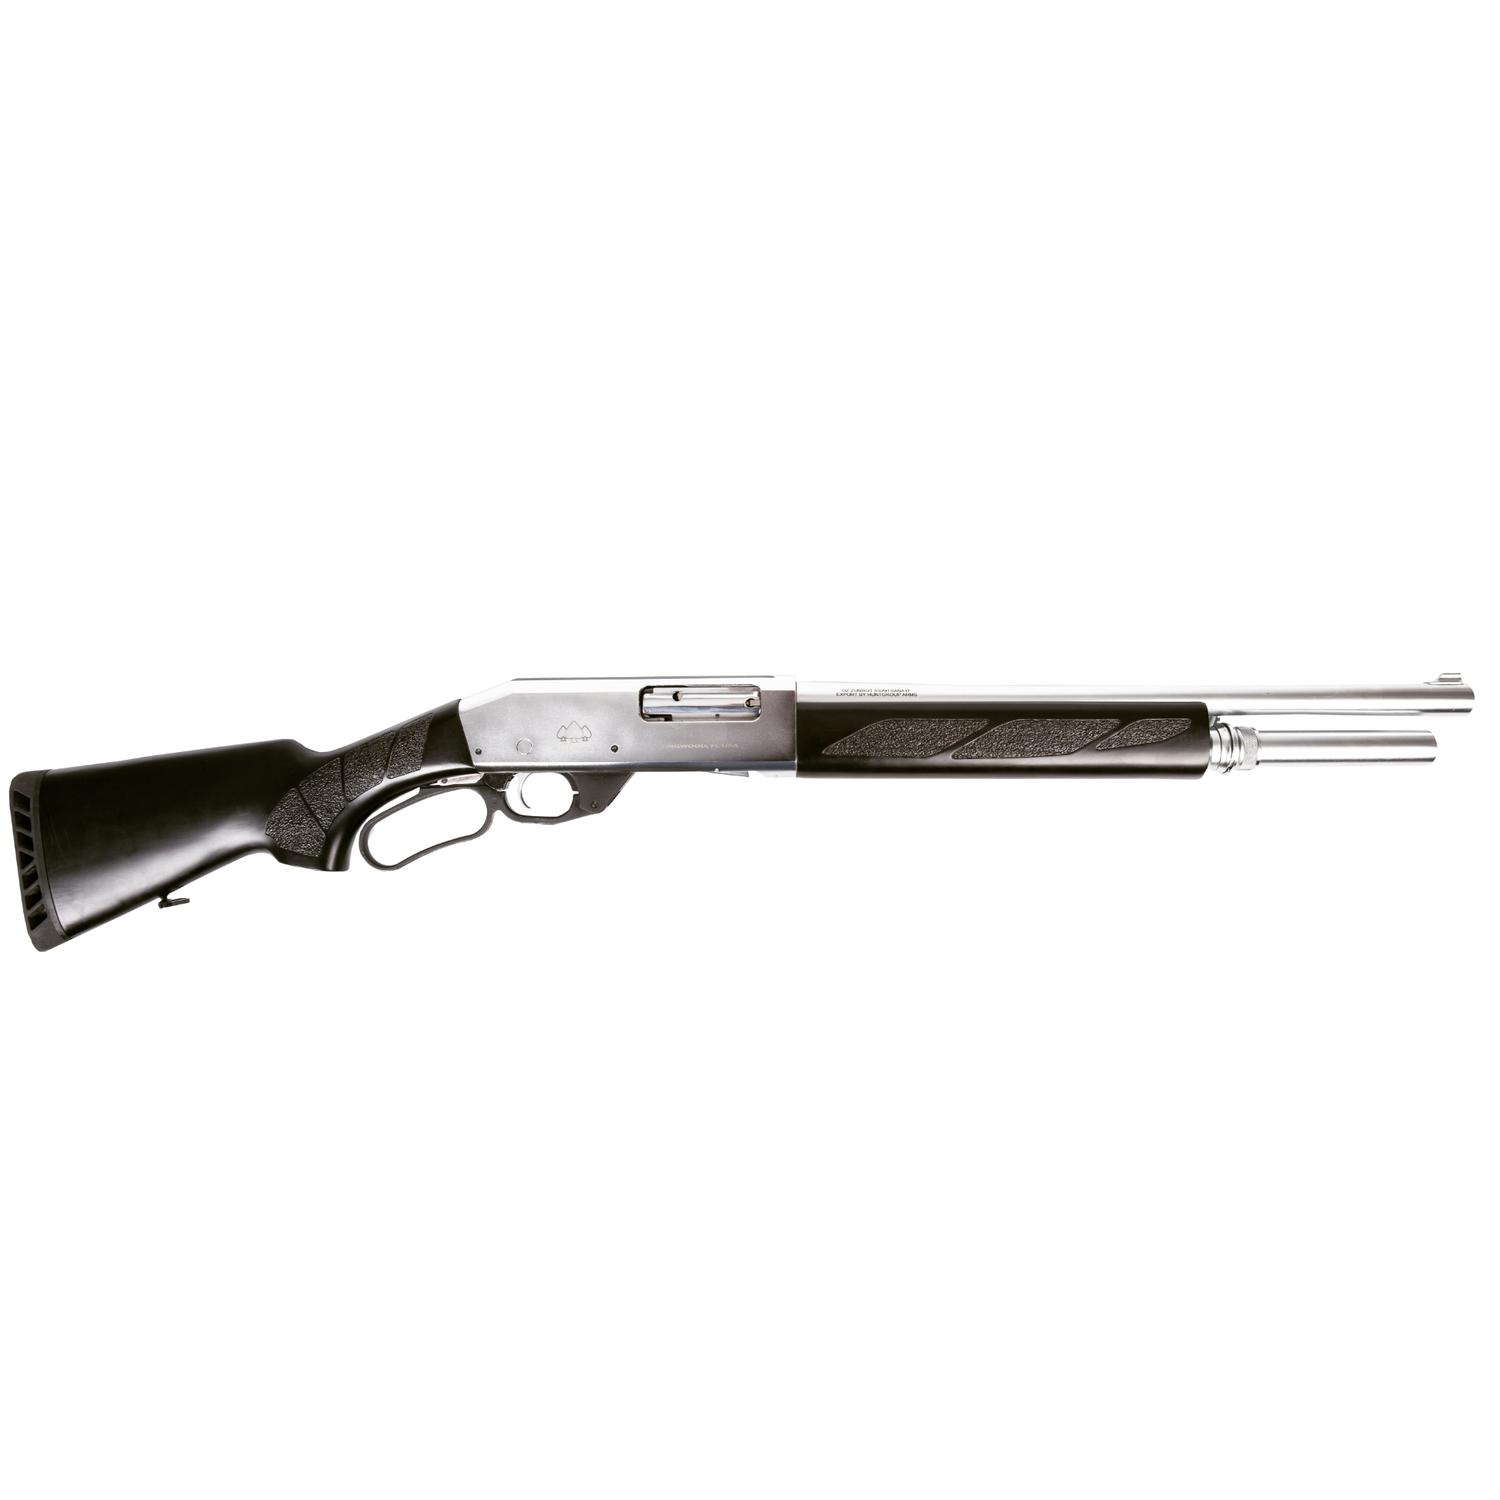  Lever Action 12ga 18.5in Stainless/Black